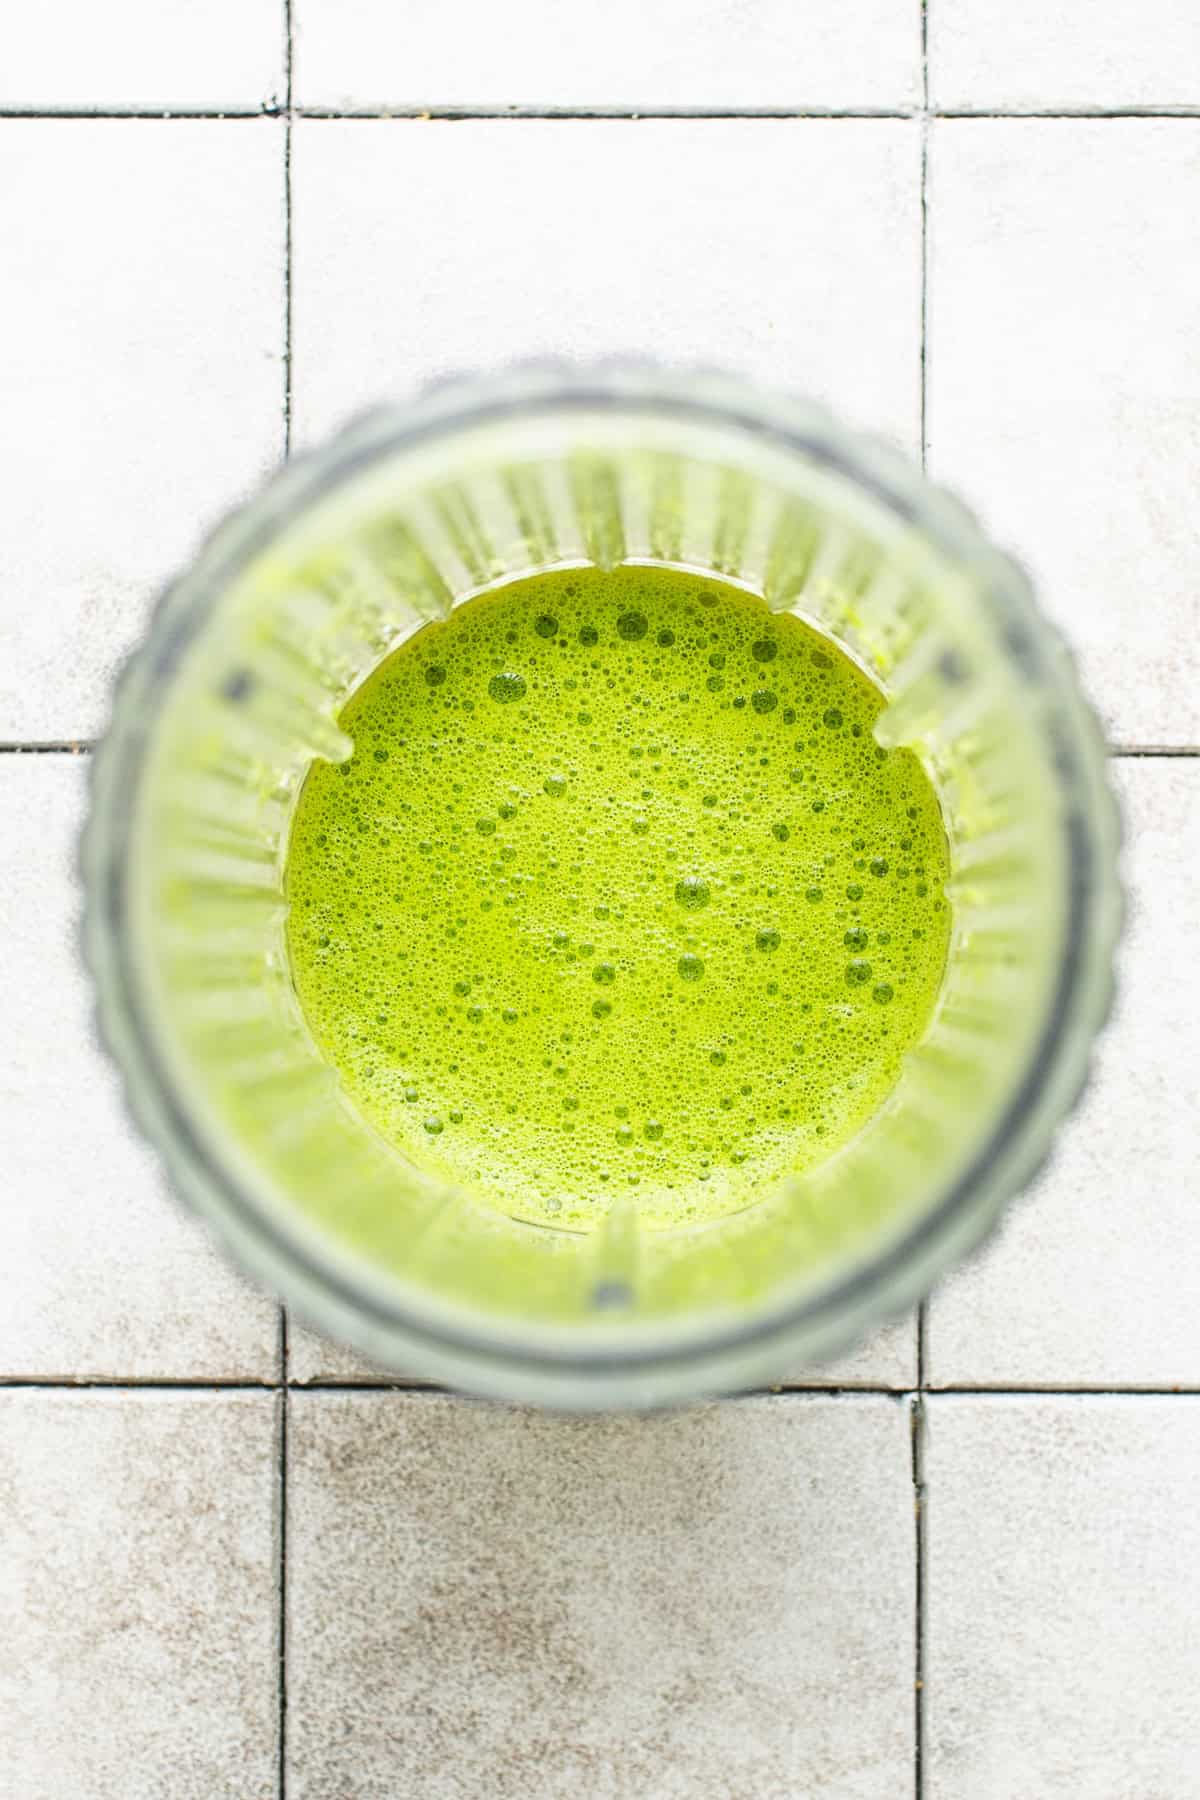 Blended serrano, cilantro, and lime juice in a blender.